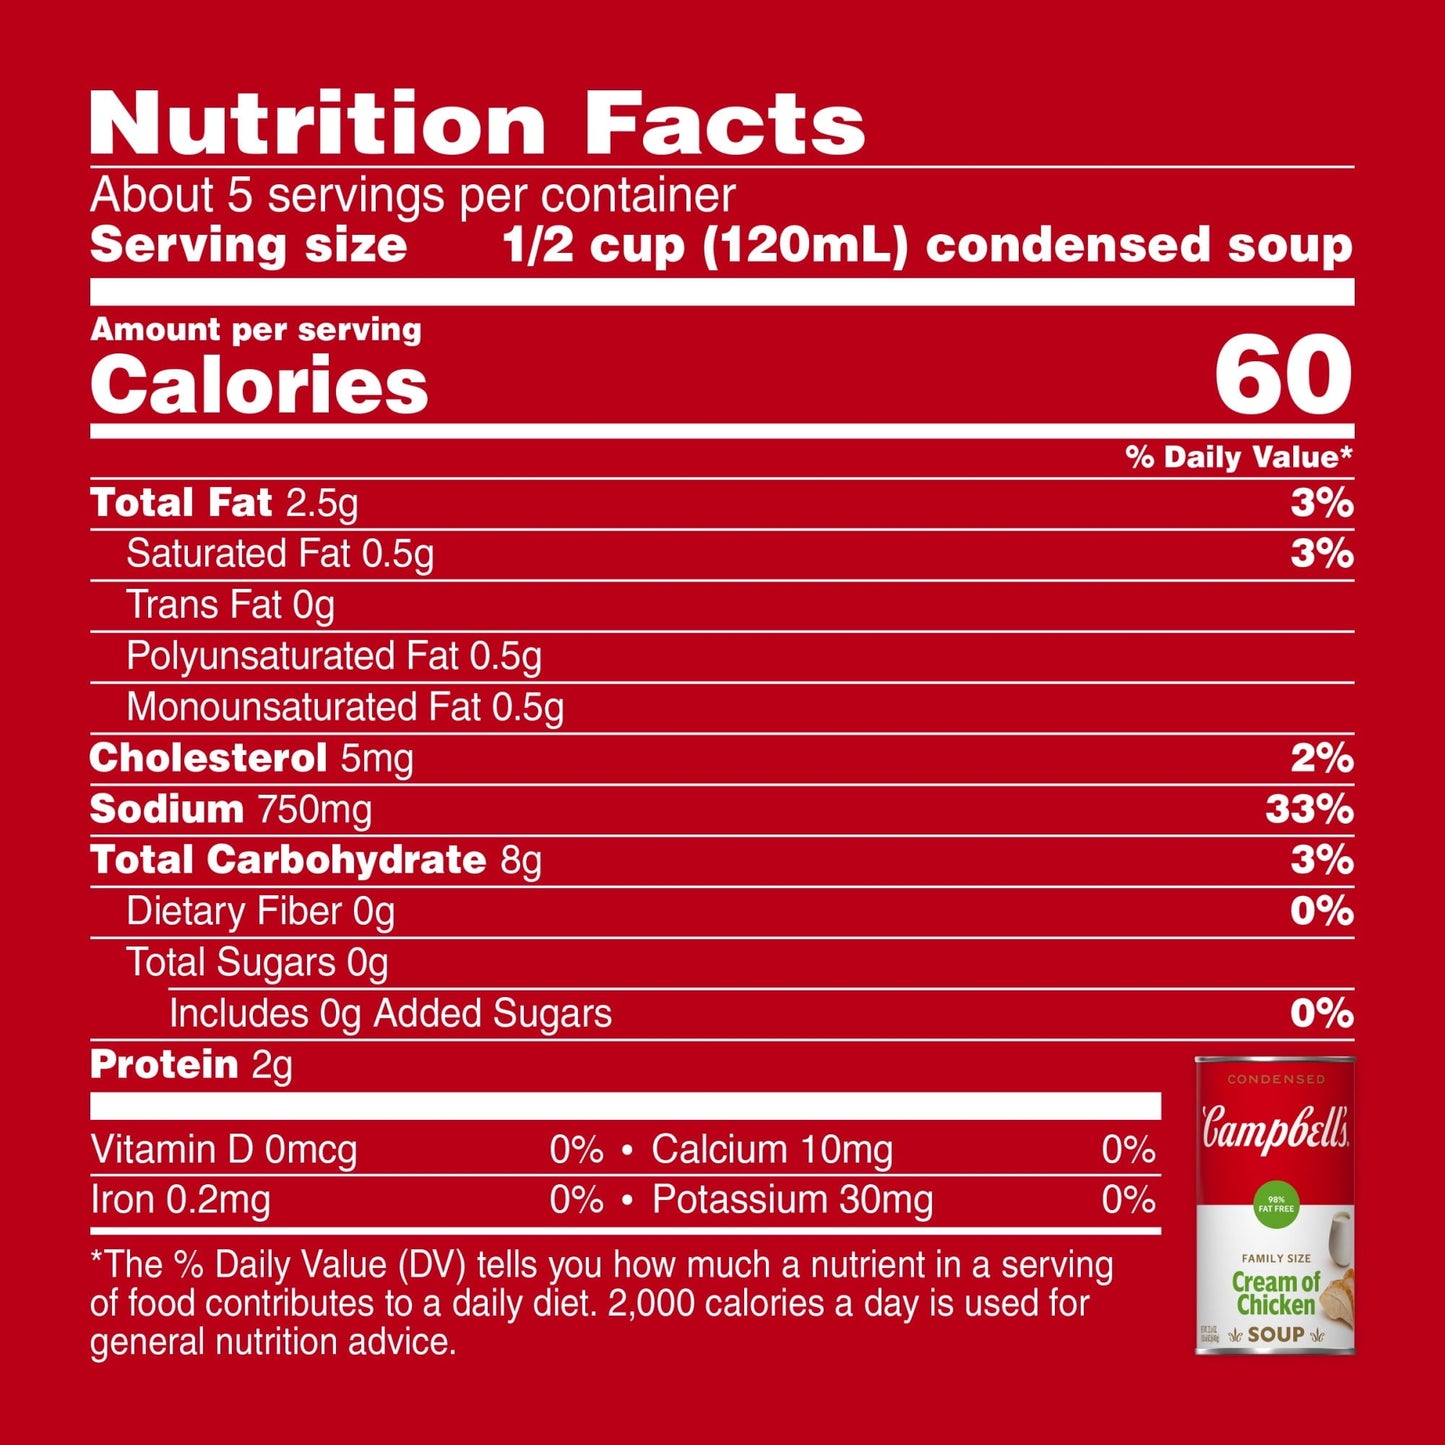 Campbell’s Condensed 98% Fat Free Cream of Chicken Soup, 22.6 Ounce Can